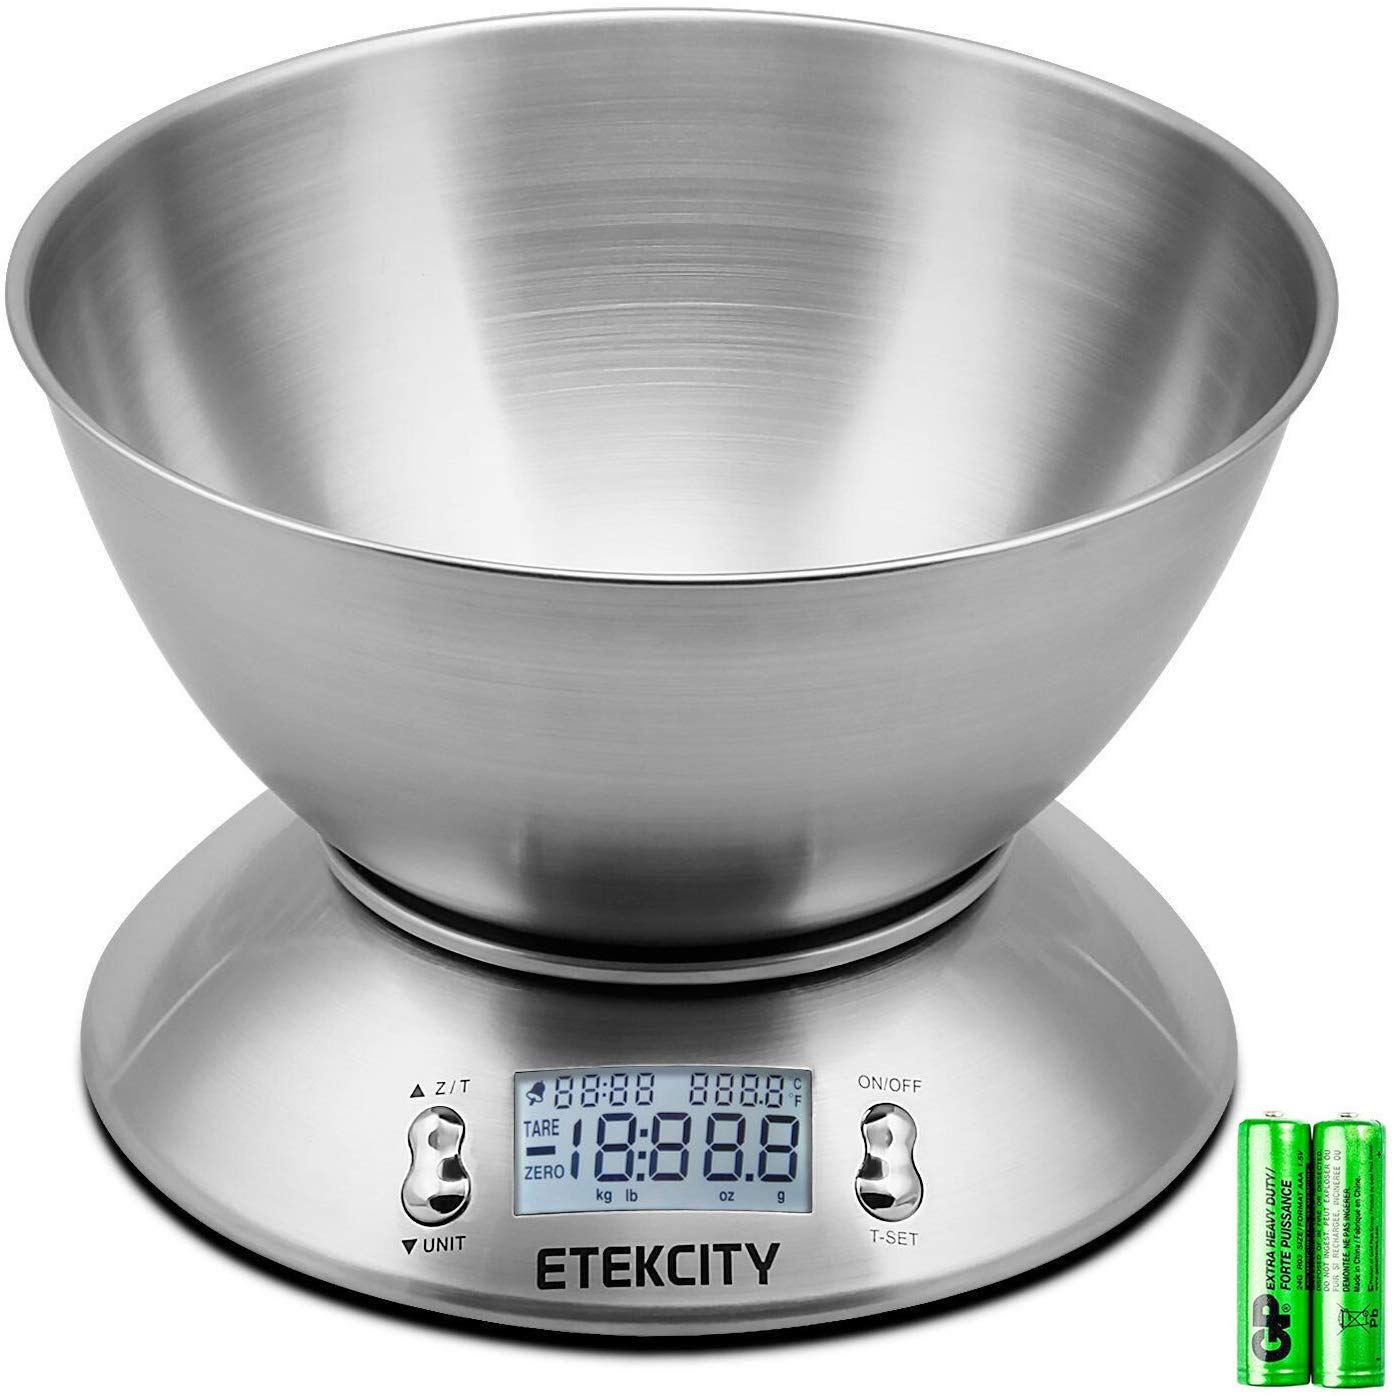 Etekcity Stainless Steel Precise Food Scale